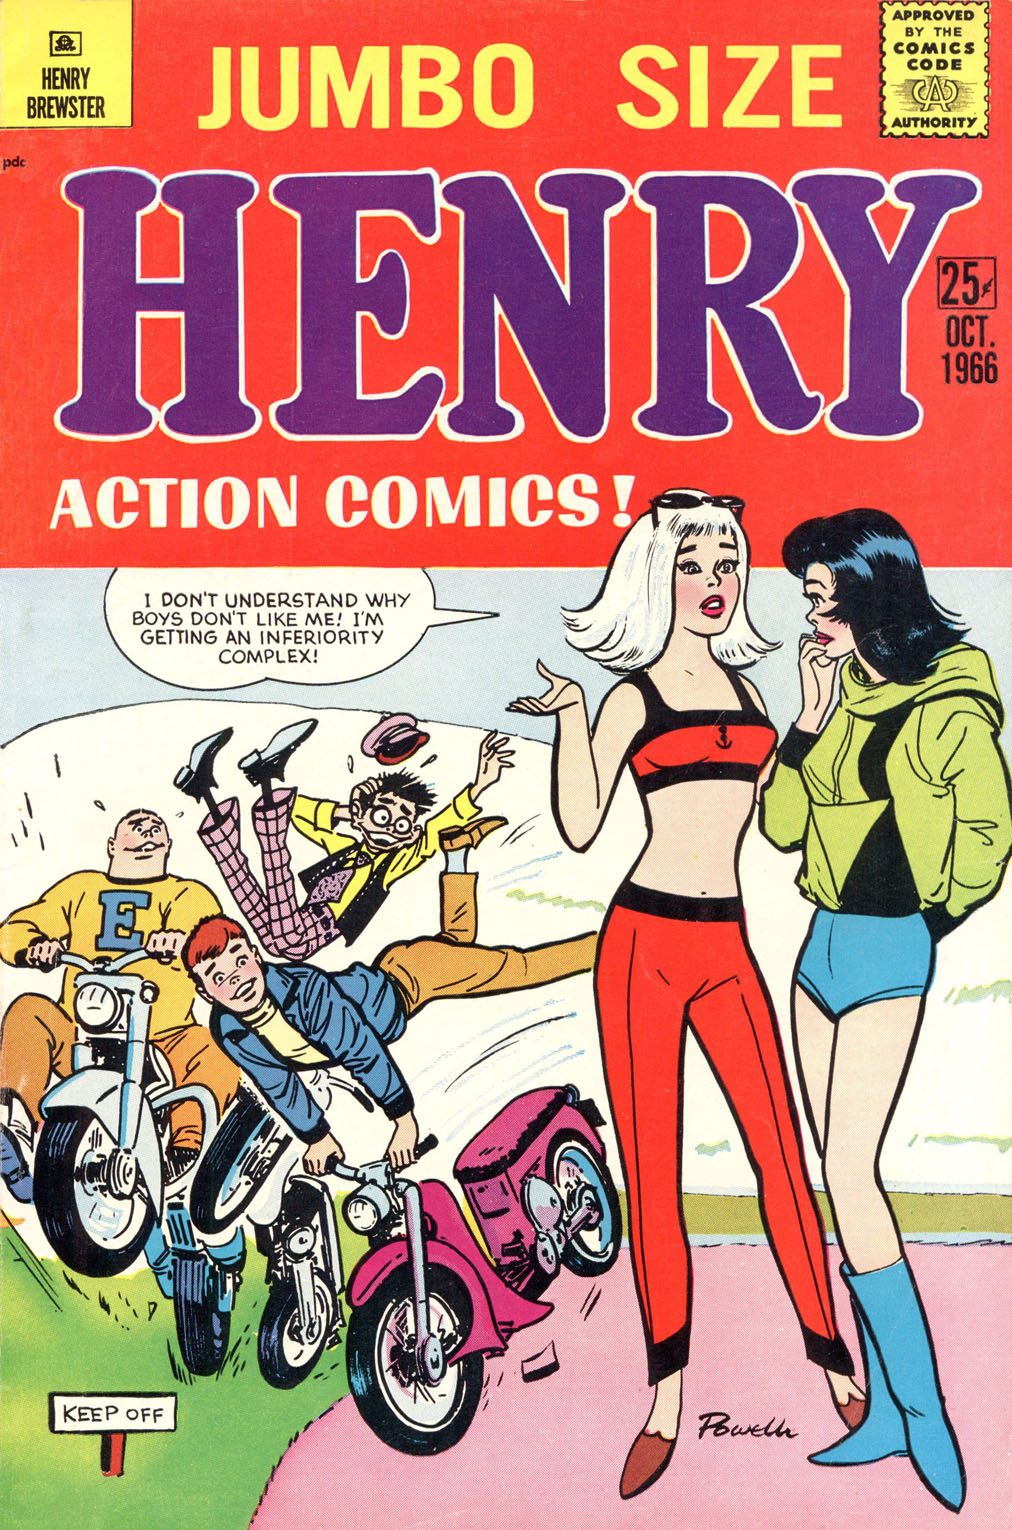 Read online Henry Brewster comic -  Issue #5 - 1